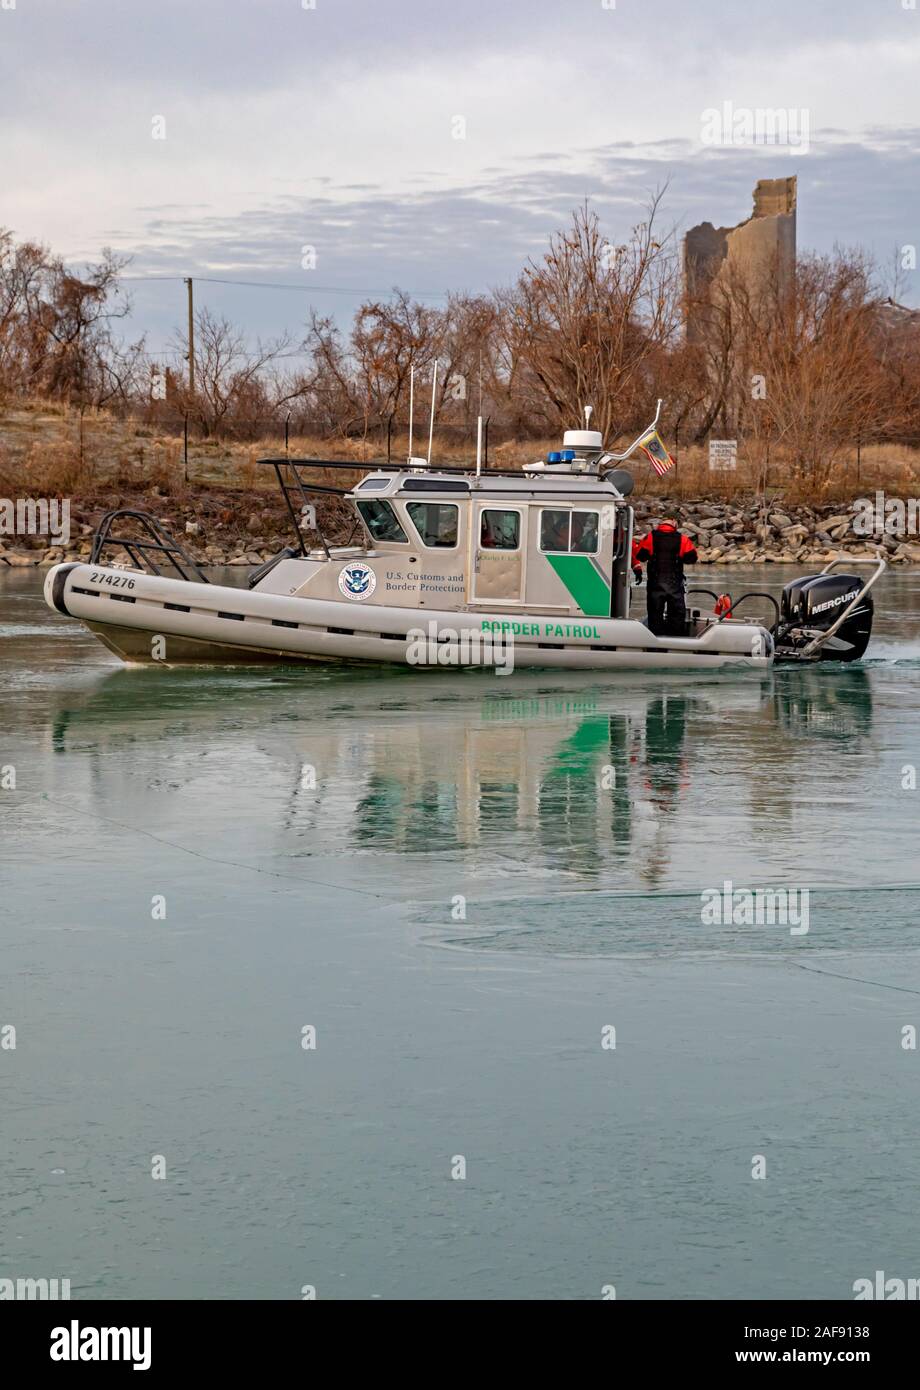 Detroit, Michigan - A U.S. Border Patrol boat cuts through ice on Conners Creek on its way to patrol the Detroit River between the United States and C Stock Photo